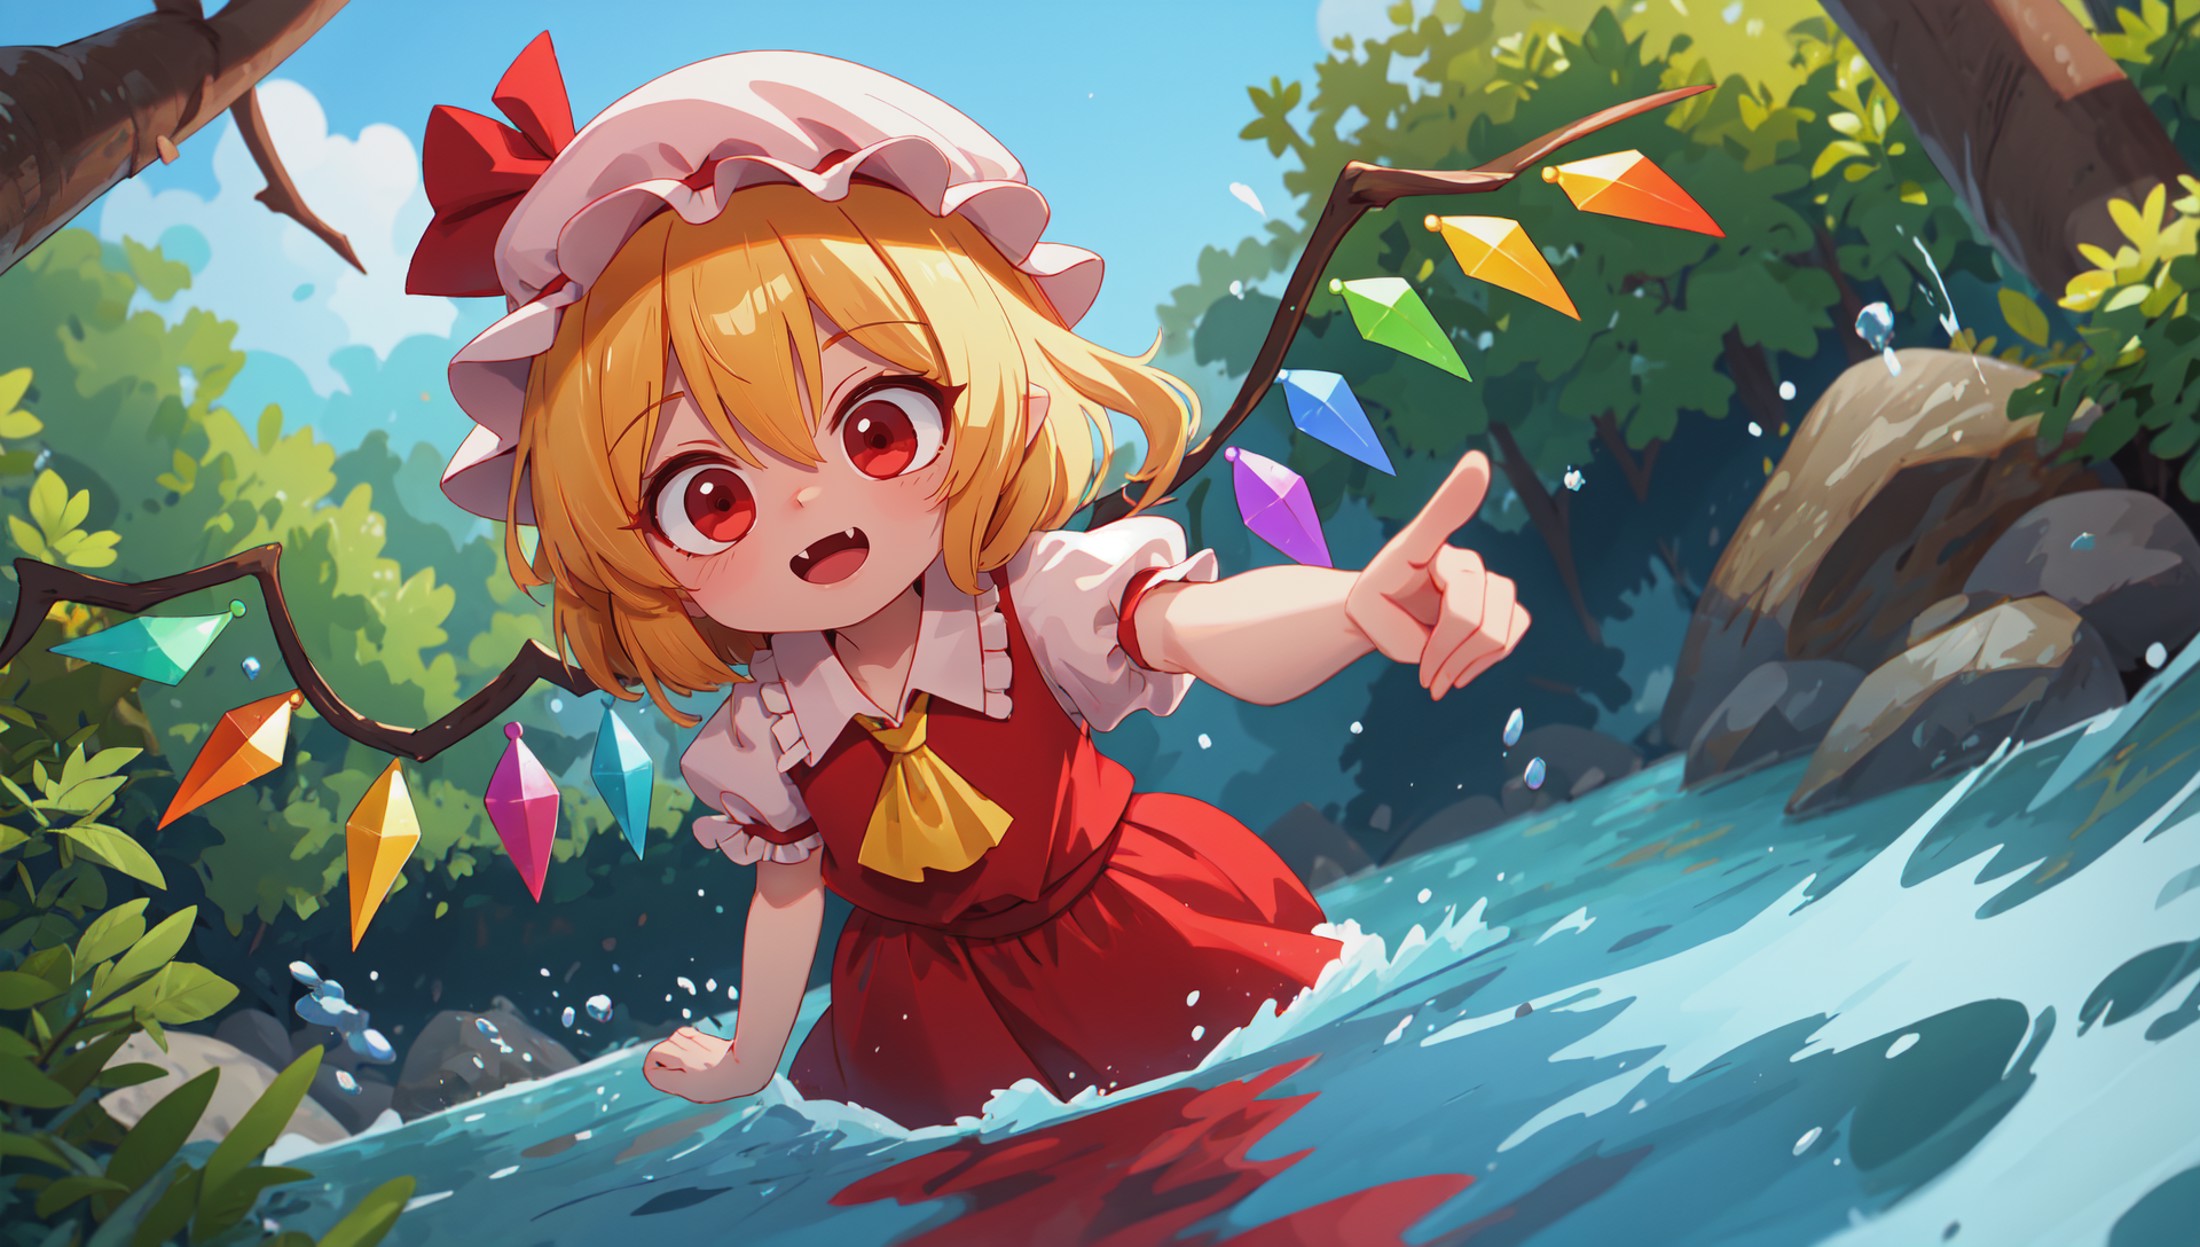 flandre scarlet, mob cap, skin fang, blonde hair, red eyes, superb, looking down, splashing in a stream, nature, outdoors